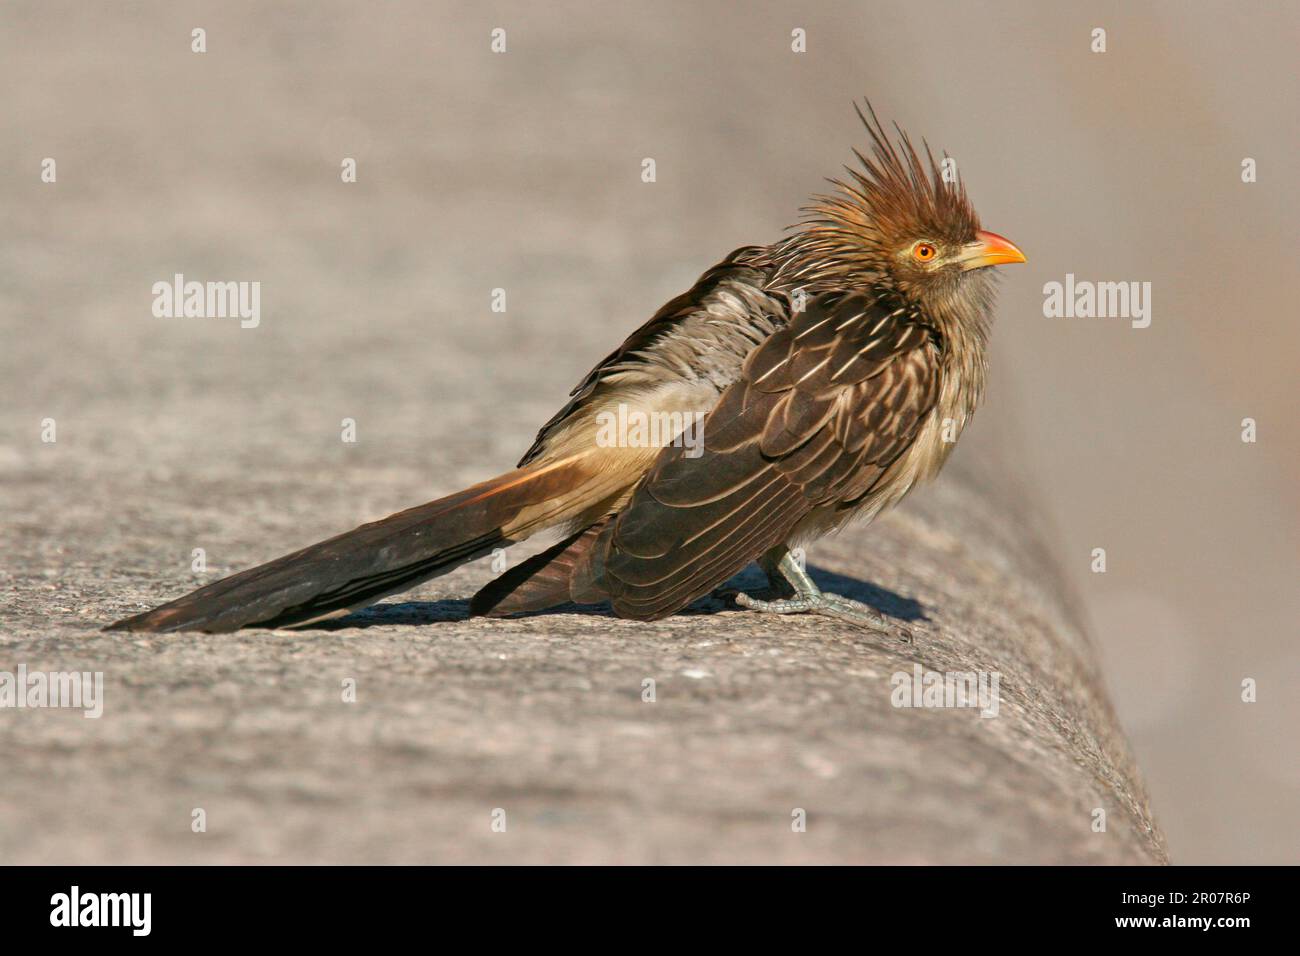 Guira cuckoos (Guira guira), Guira Cuckoo, animals, birds, cuckoo birds, Guira Cuckoo adult, standing on wall in city street, Buenos Aires, Argentina Stock Photo